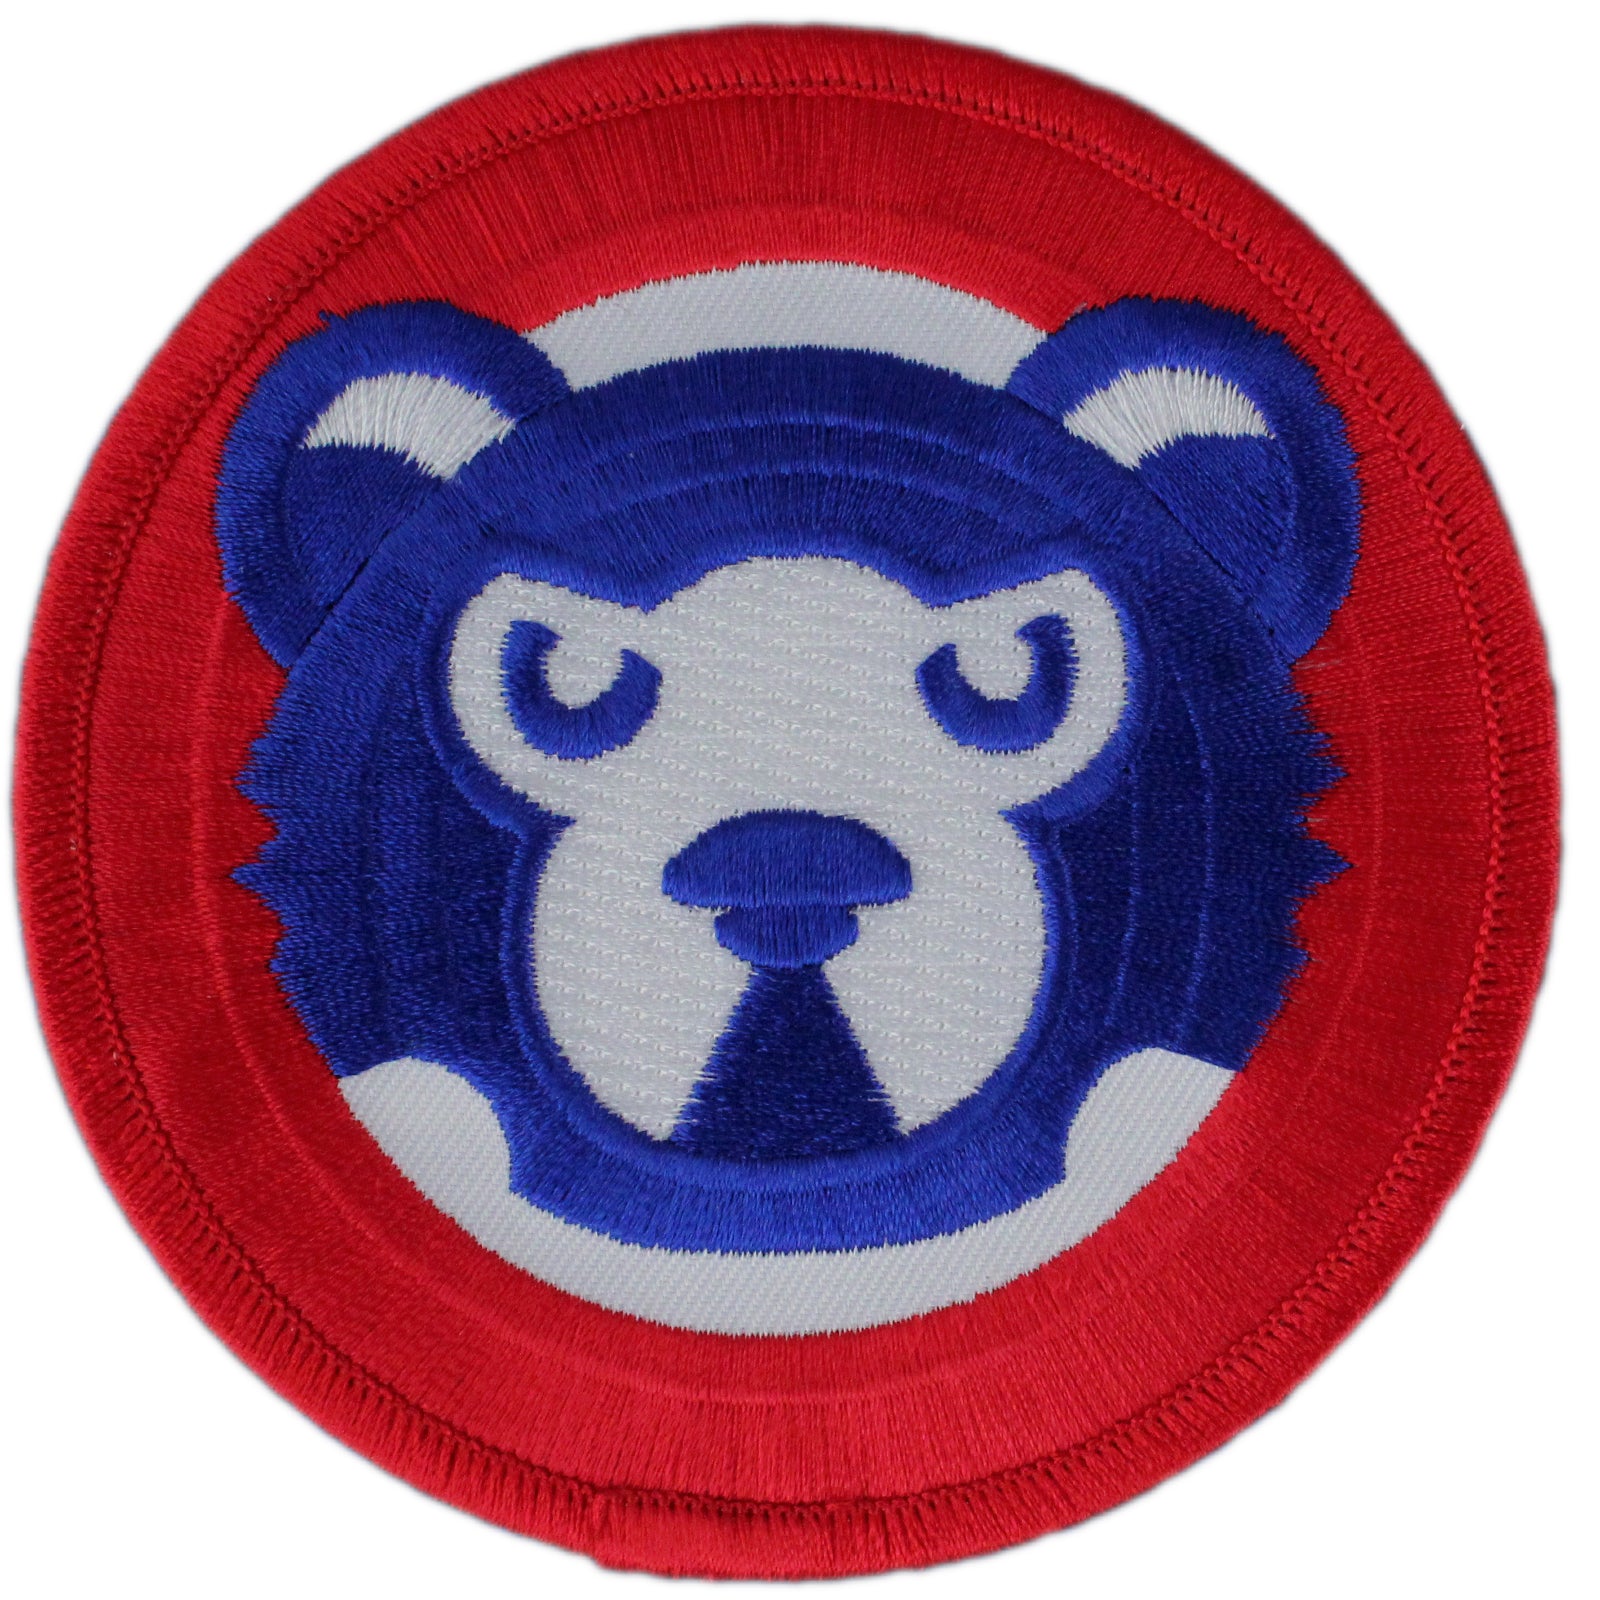 Chicago Cubs 1984 Jersey 